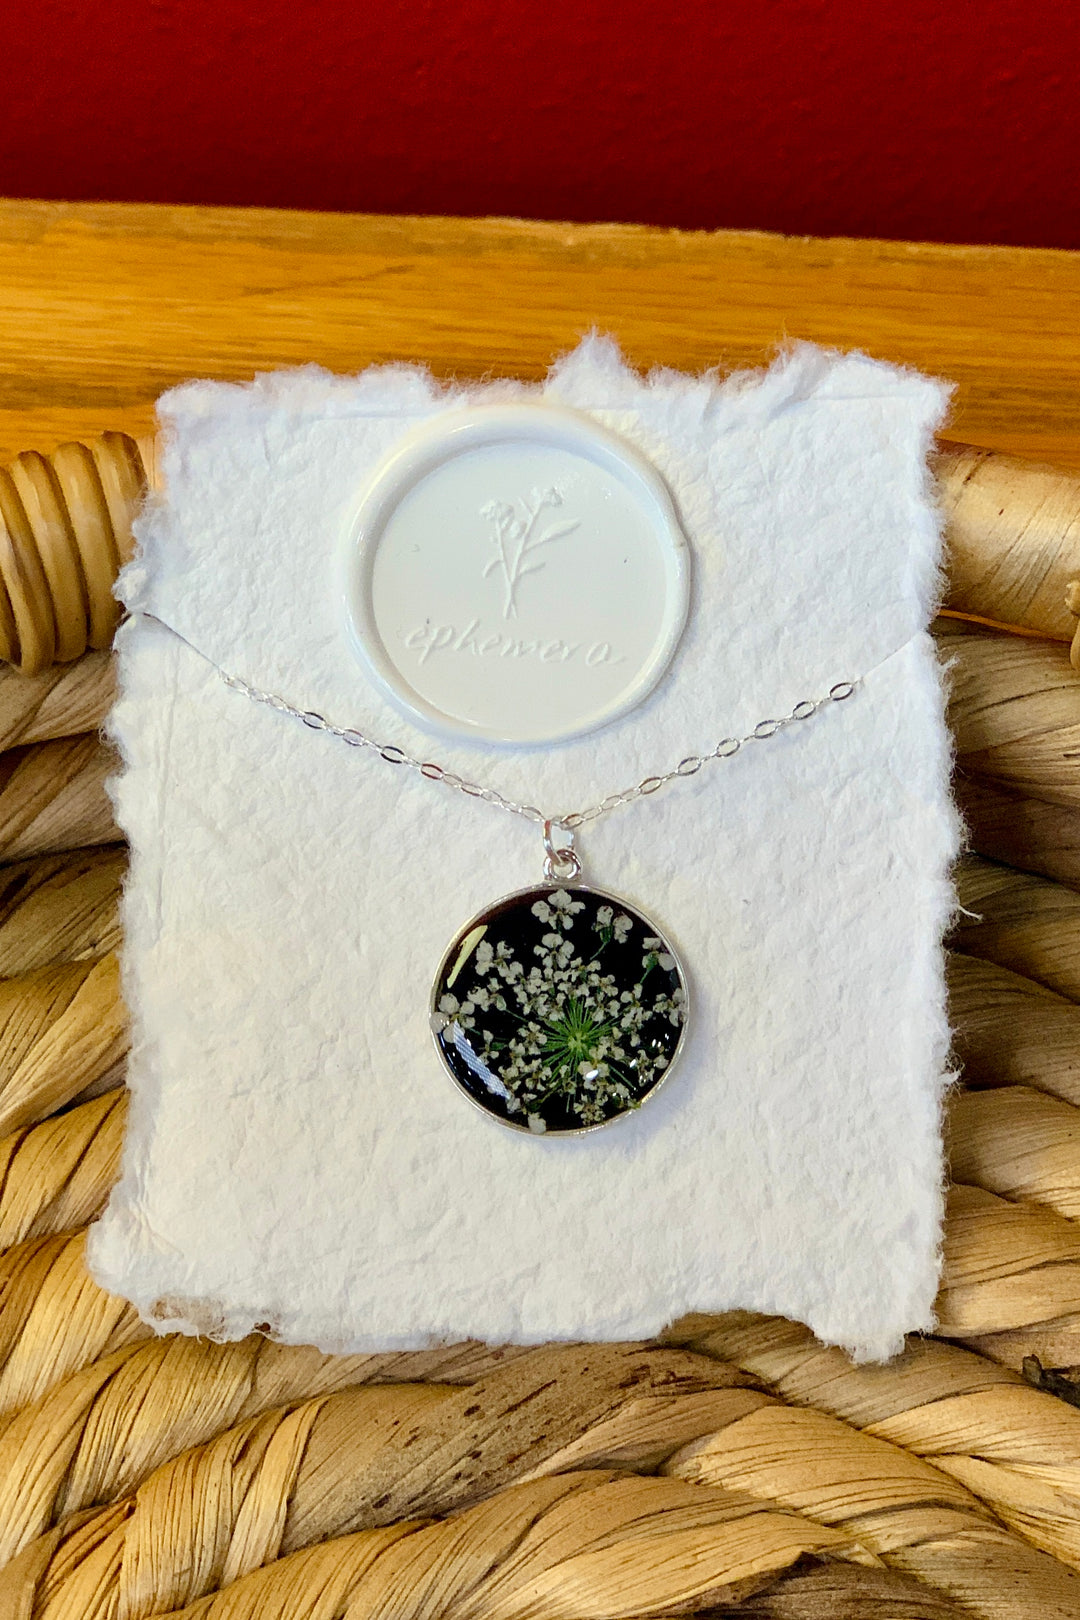 Queen Anne's Lace Botanical Necklace